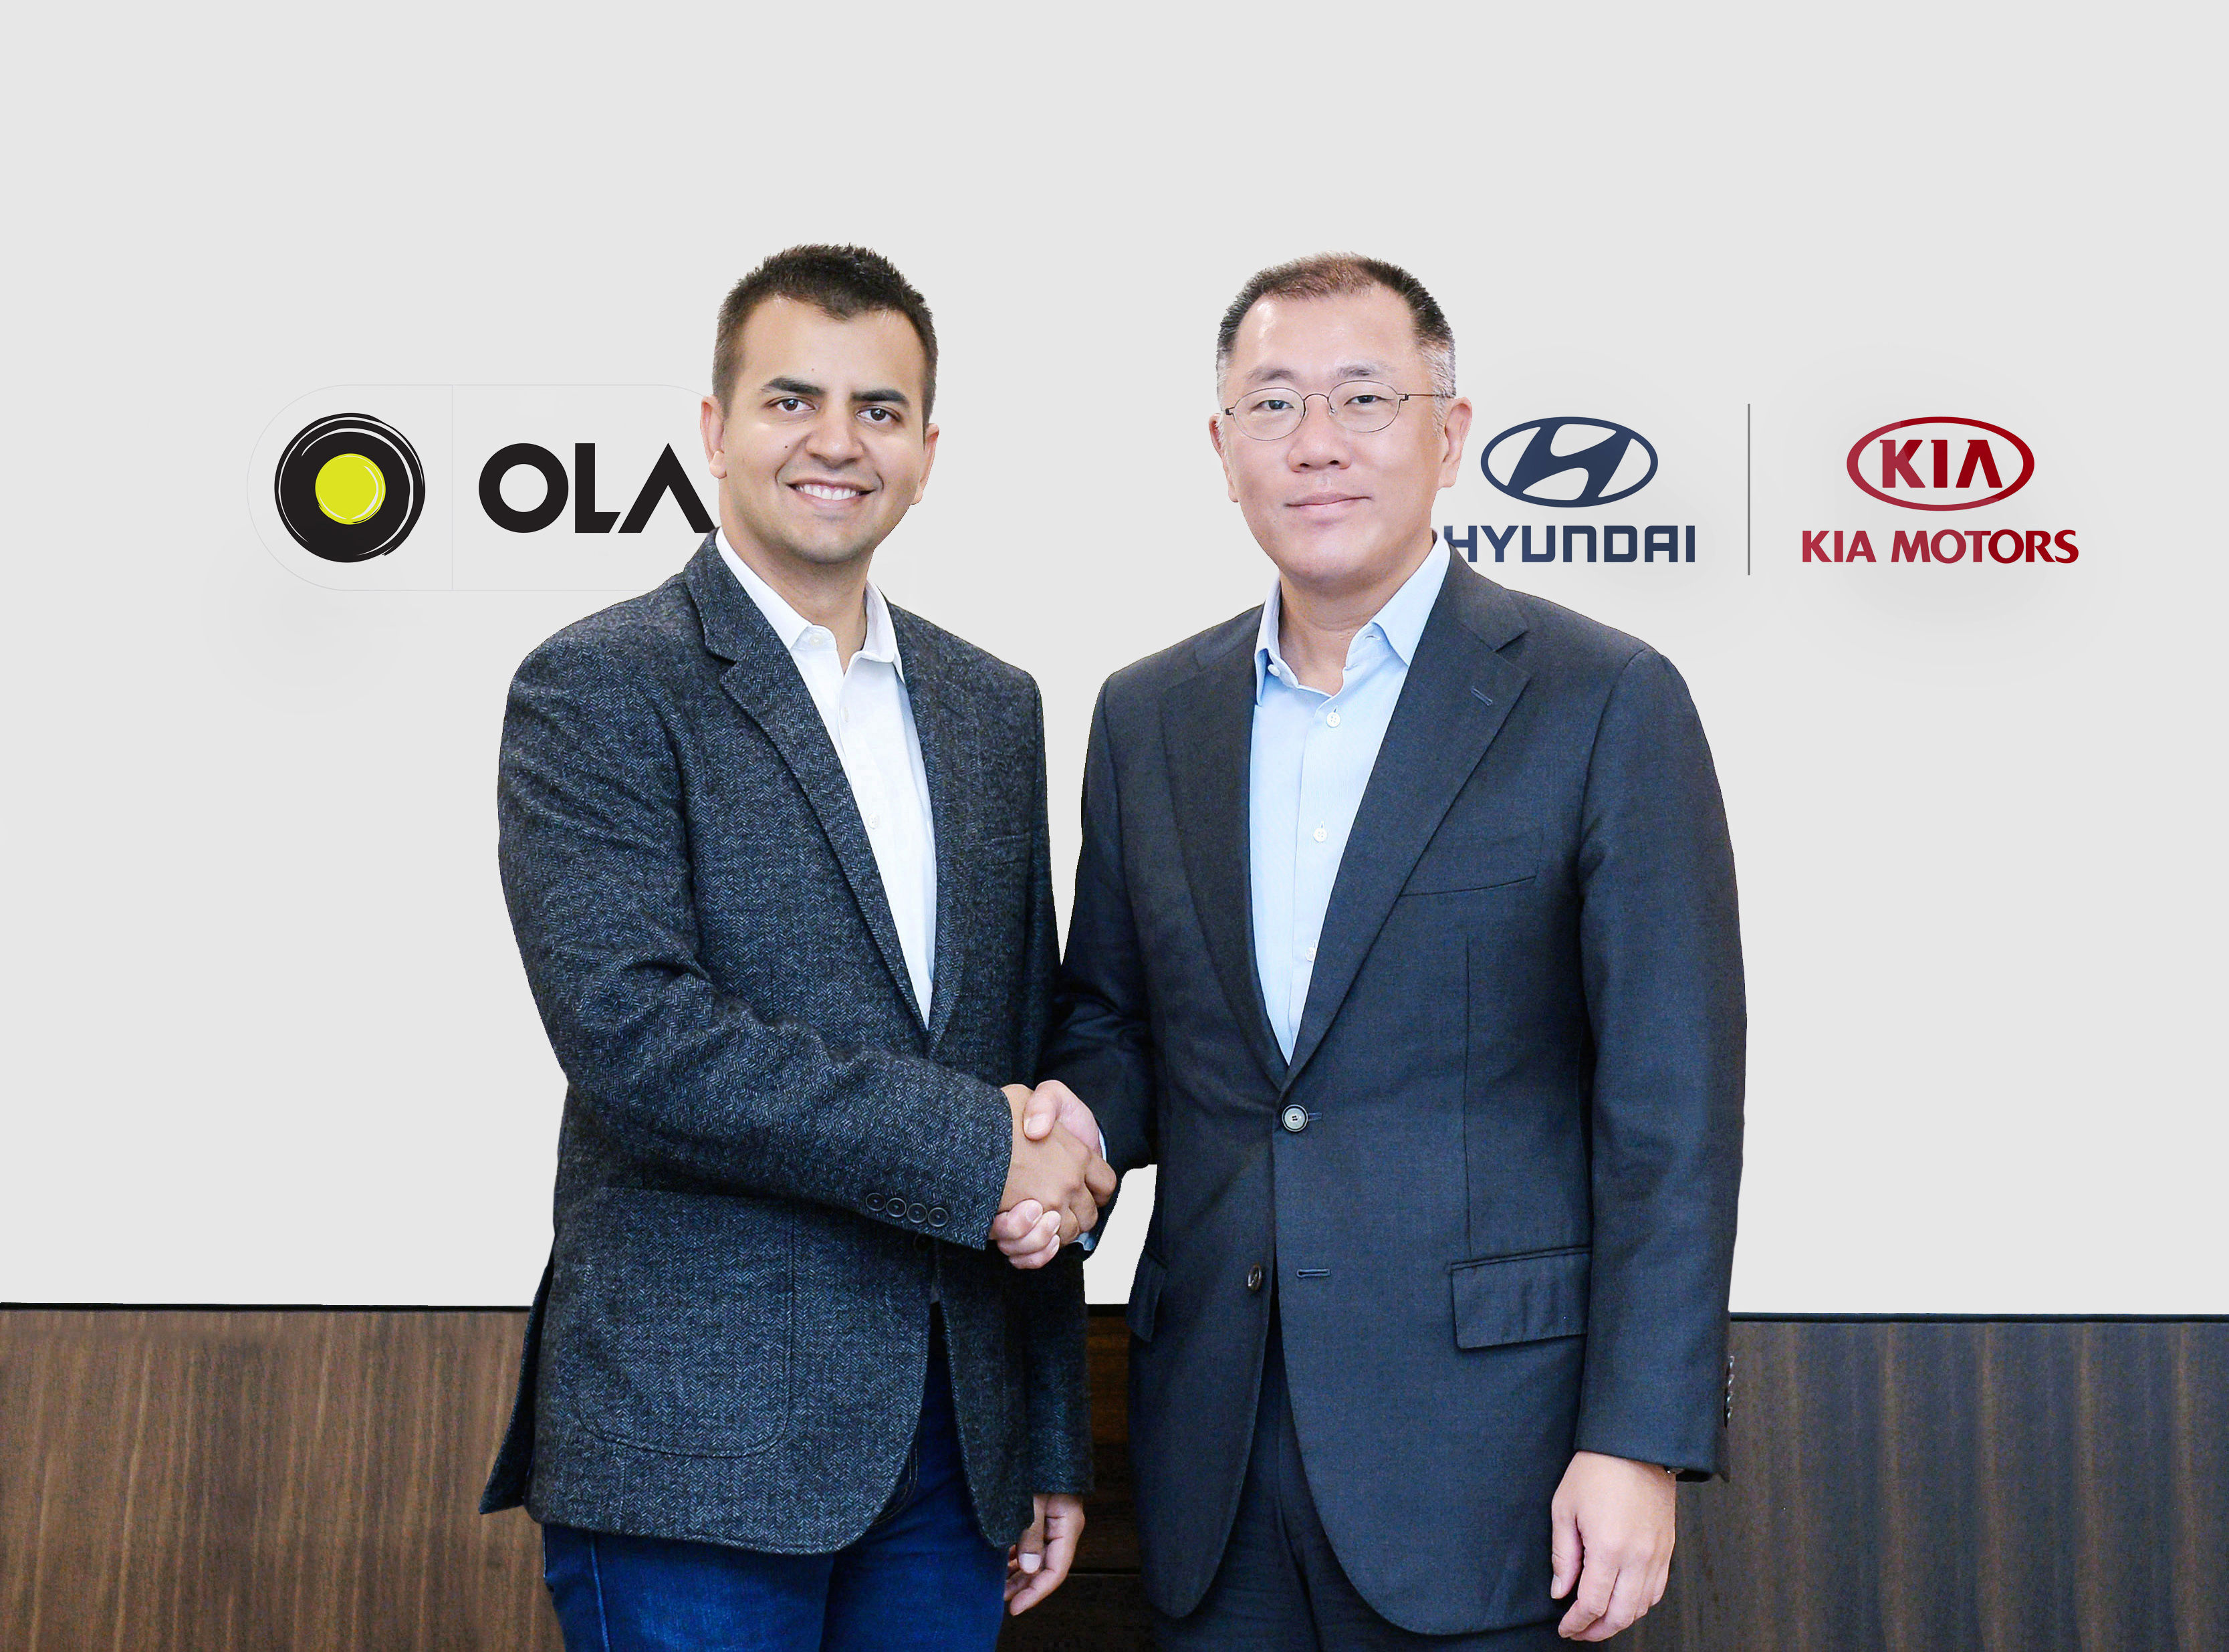 Hyundai and Kia Invest $300m in India’s Largest Mobility Service Provider Ola